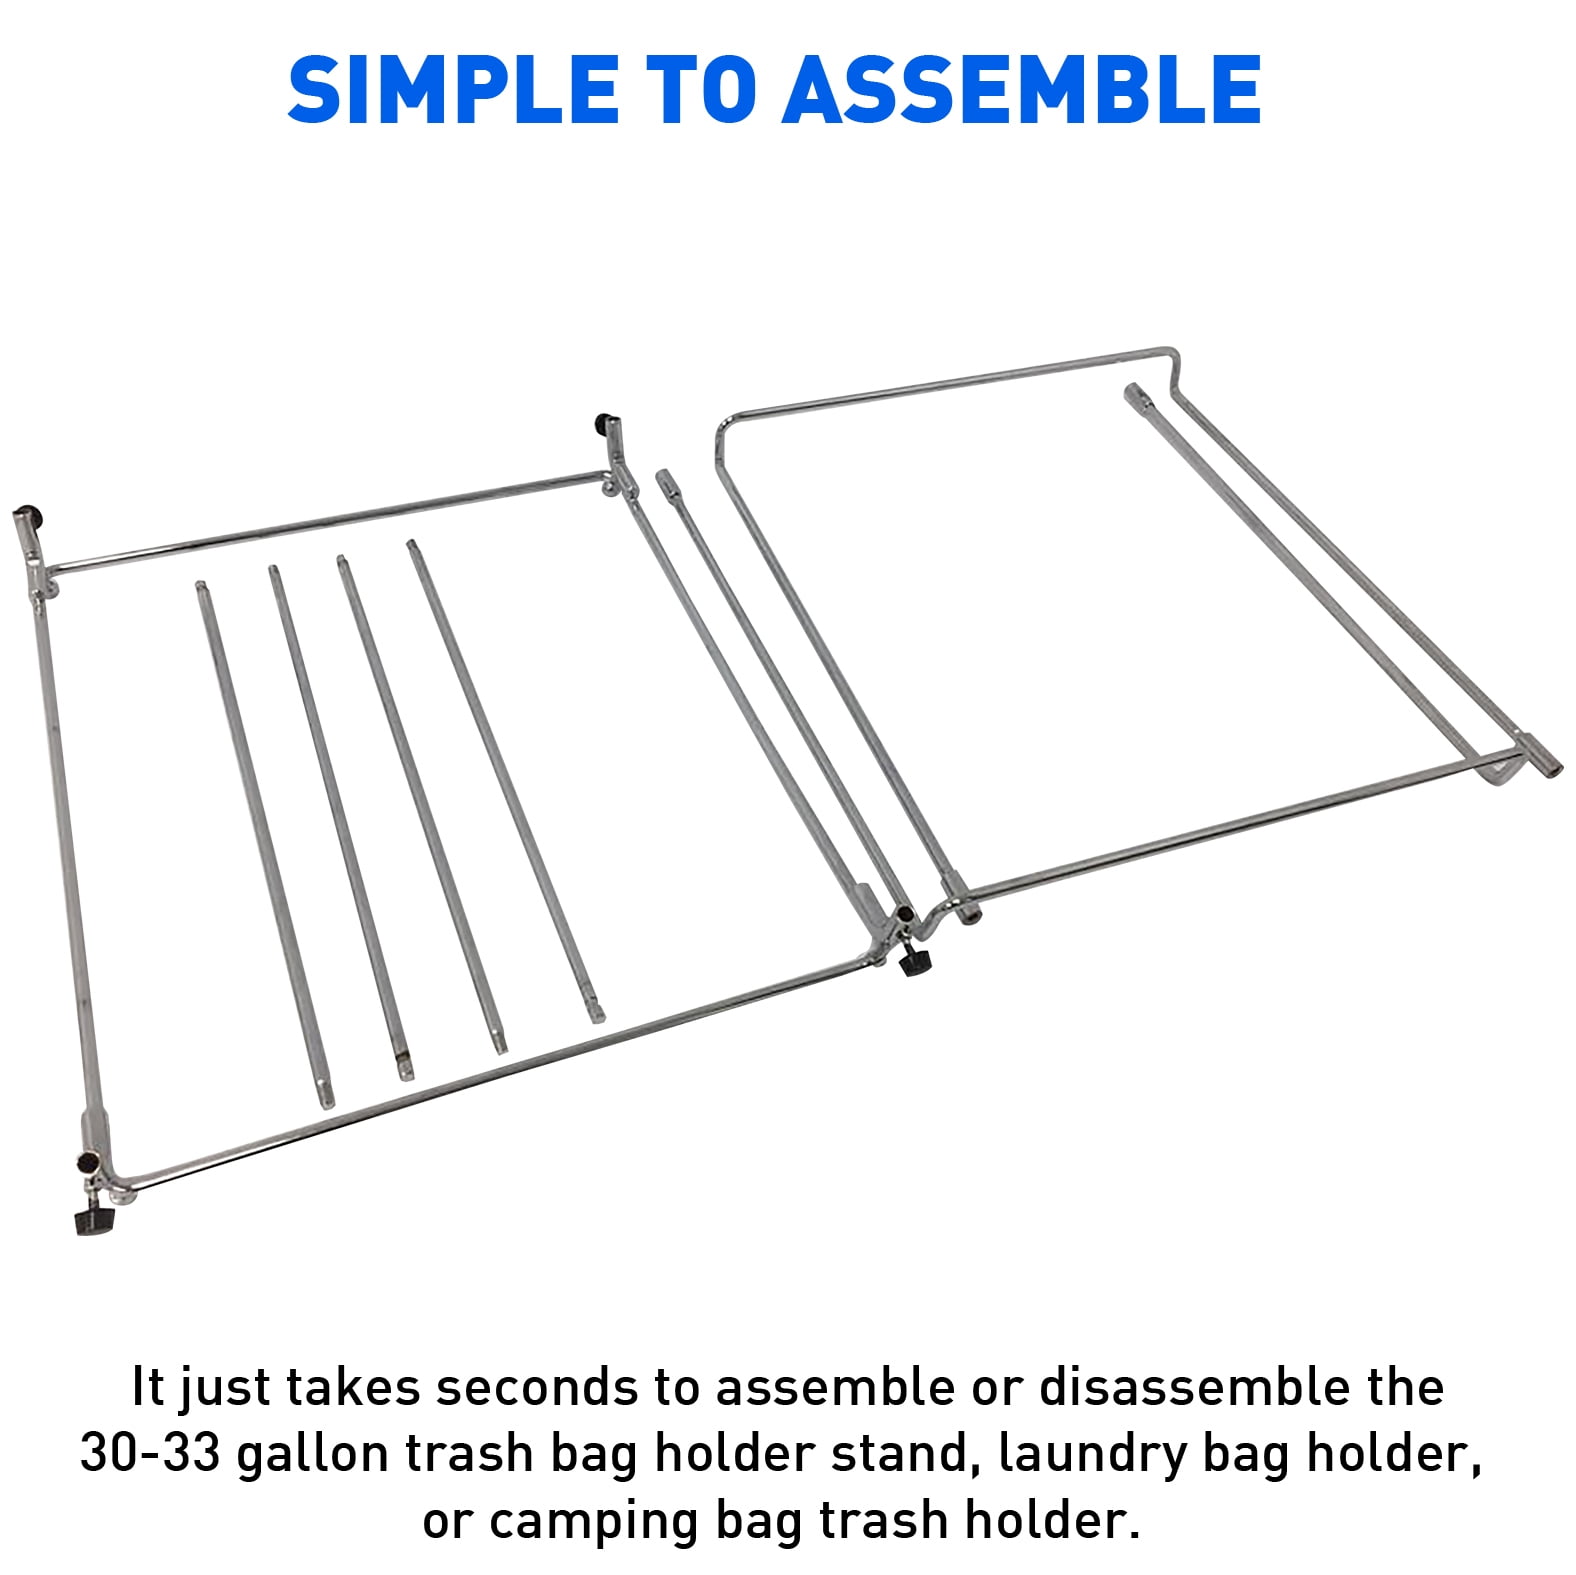 AimGrowth Trash Bag Holder Outdoor Leaf Bag Support Stand with 15 PCS 39  Gallon trash bags | Metal Garbage Bag Frame Holder for 30-45 Gallons Bags  for